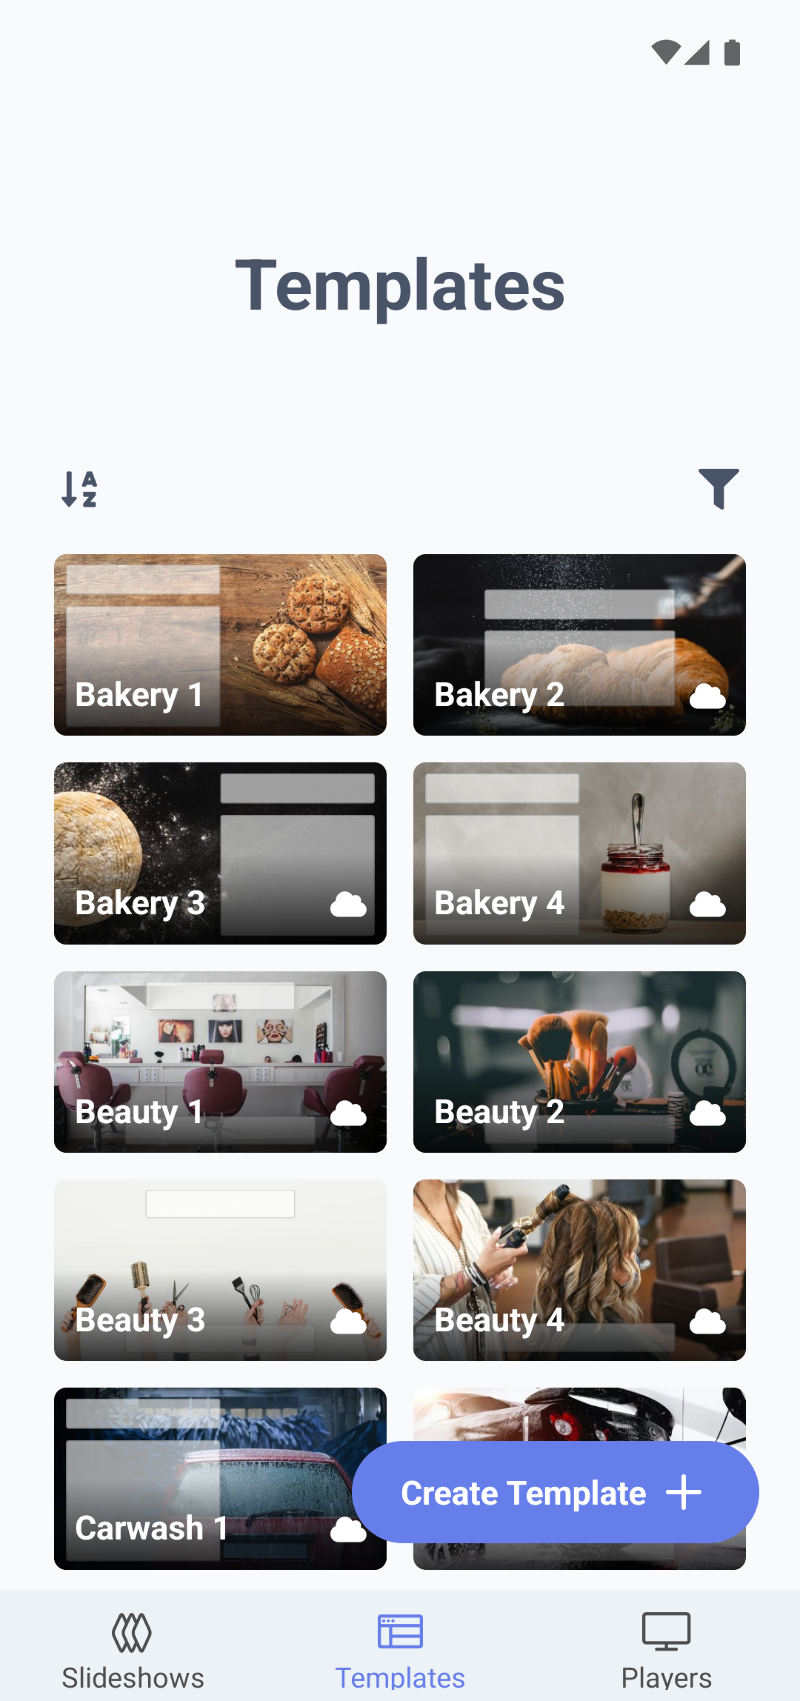 Smartphone app screenshot showing a page titled Templates, containing a grid of photos